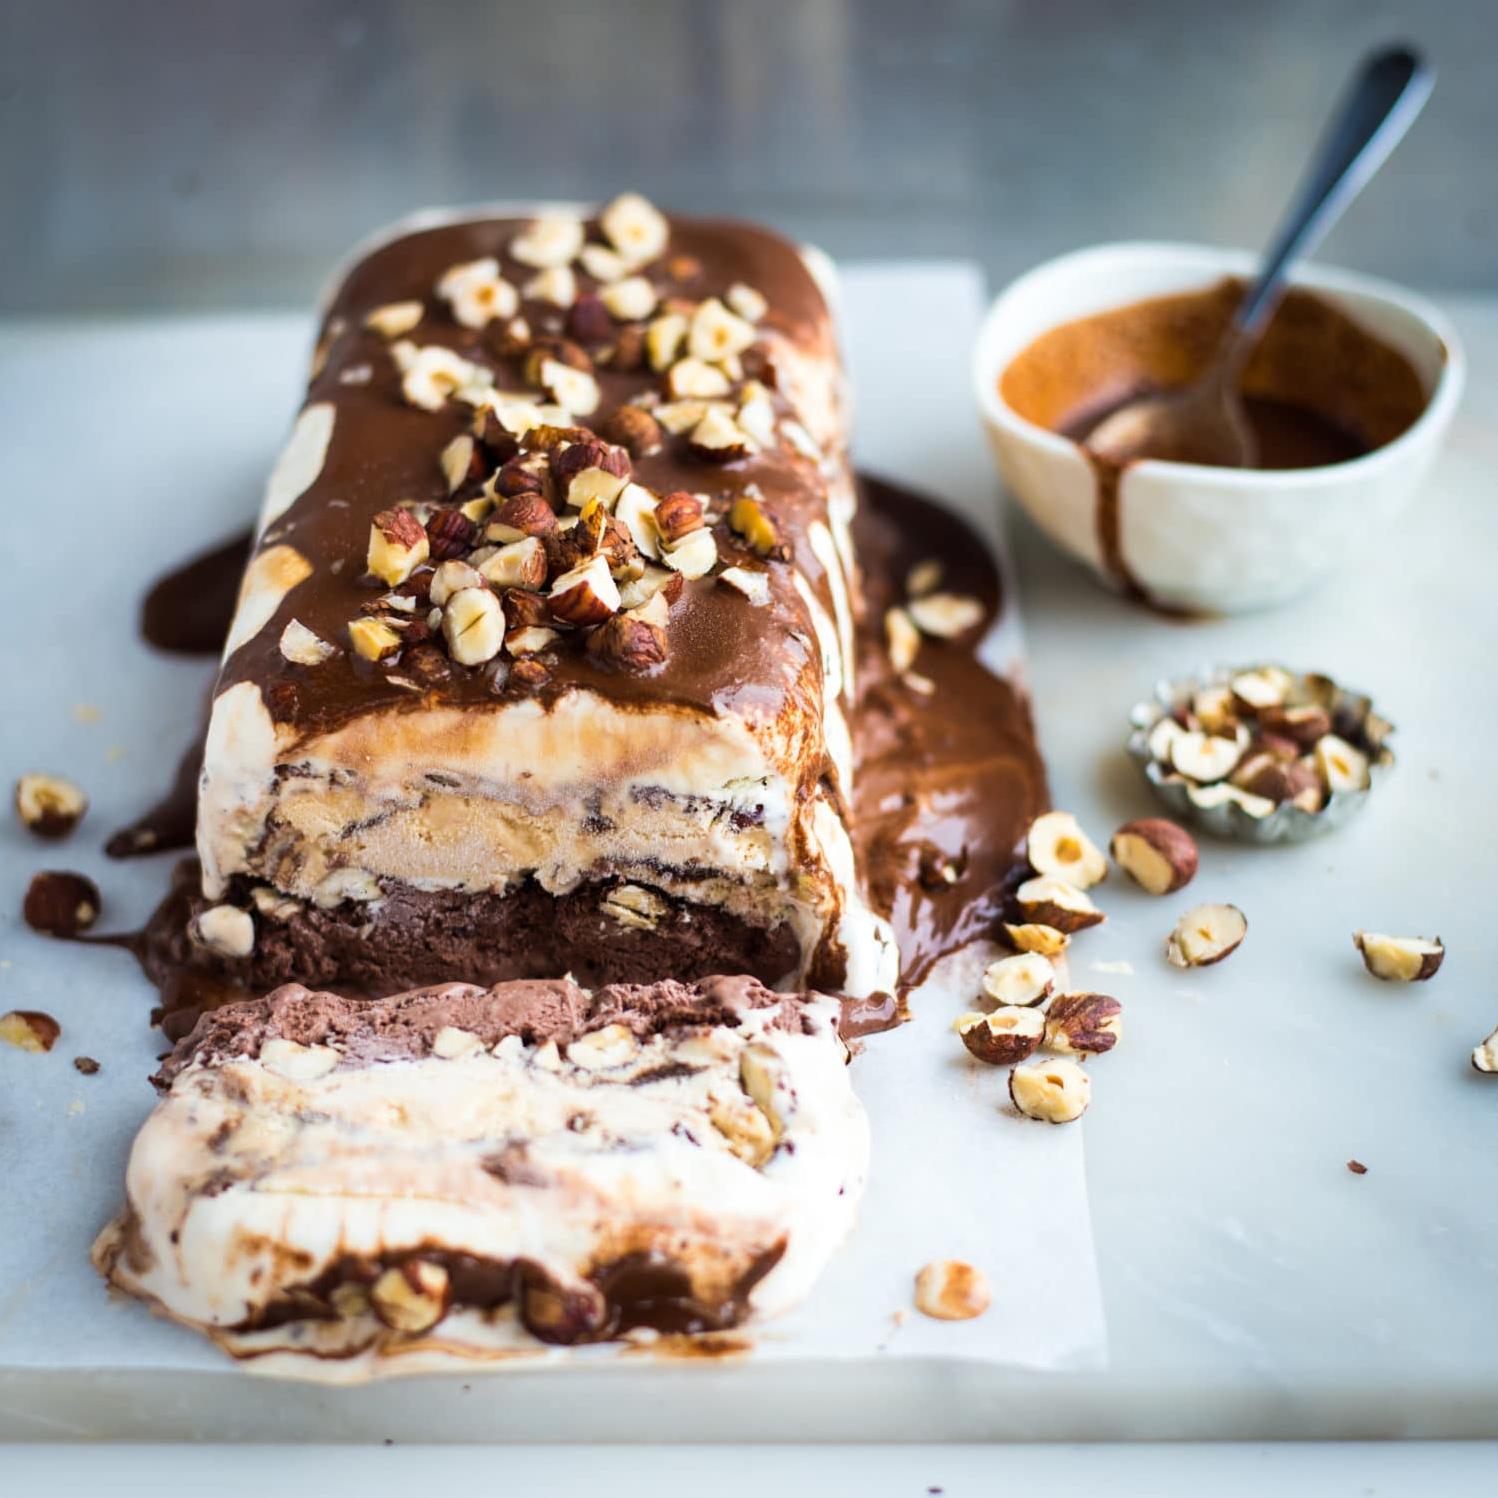  A decadent treat for the holidays: Chocolate, Latte, and Eggnog Ice Cream Terrine